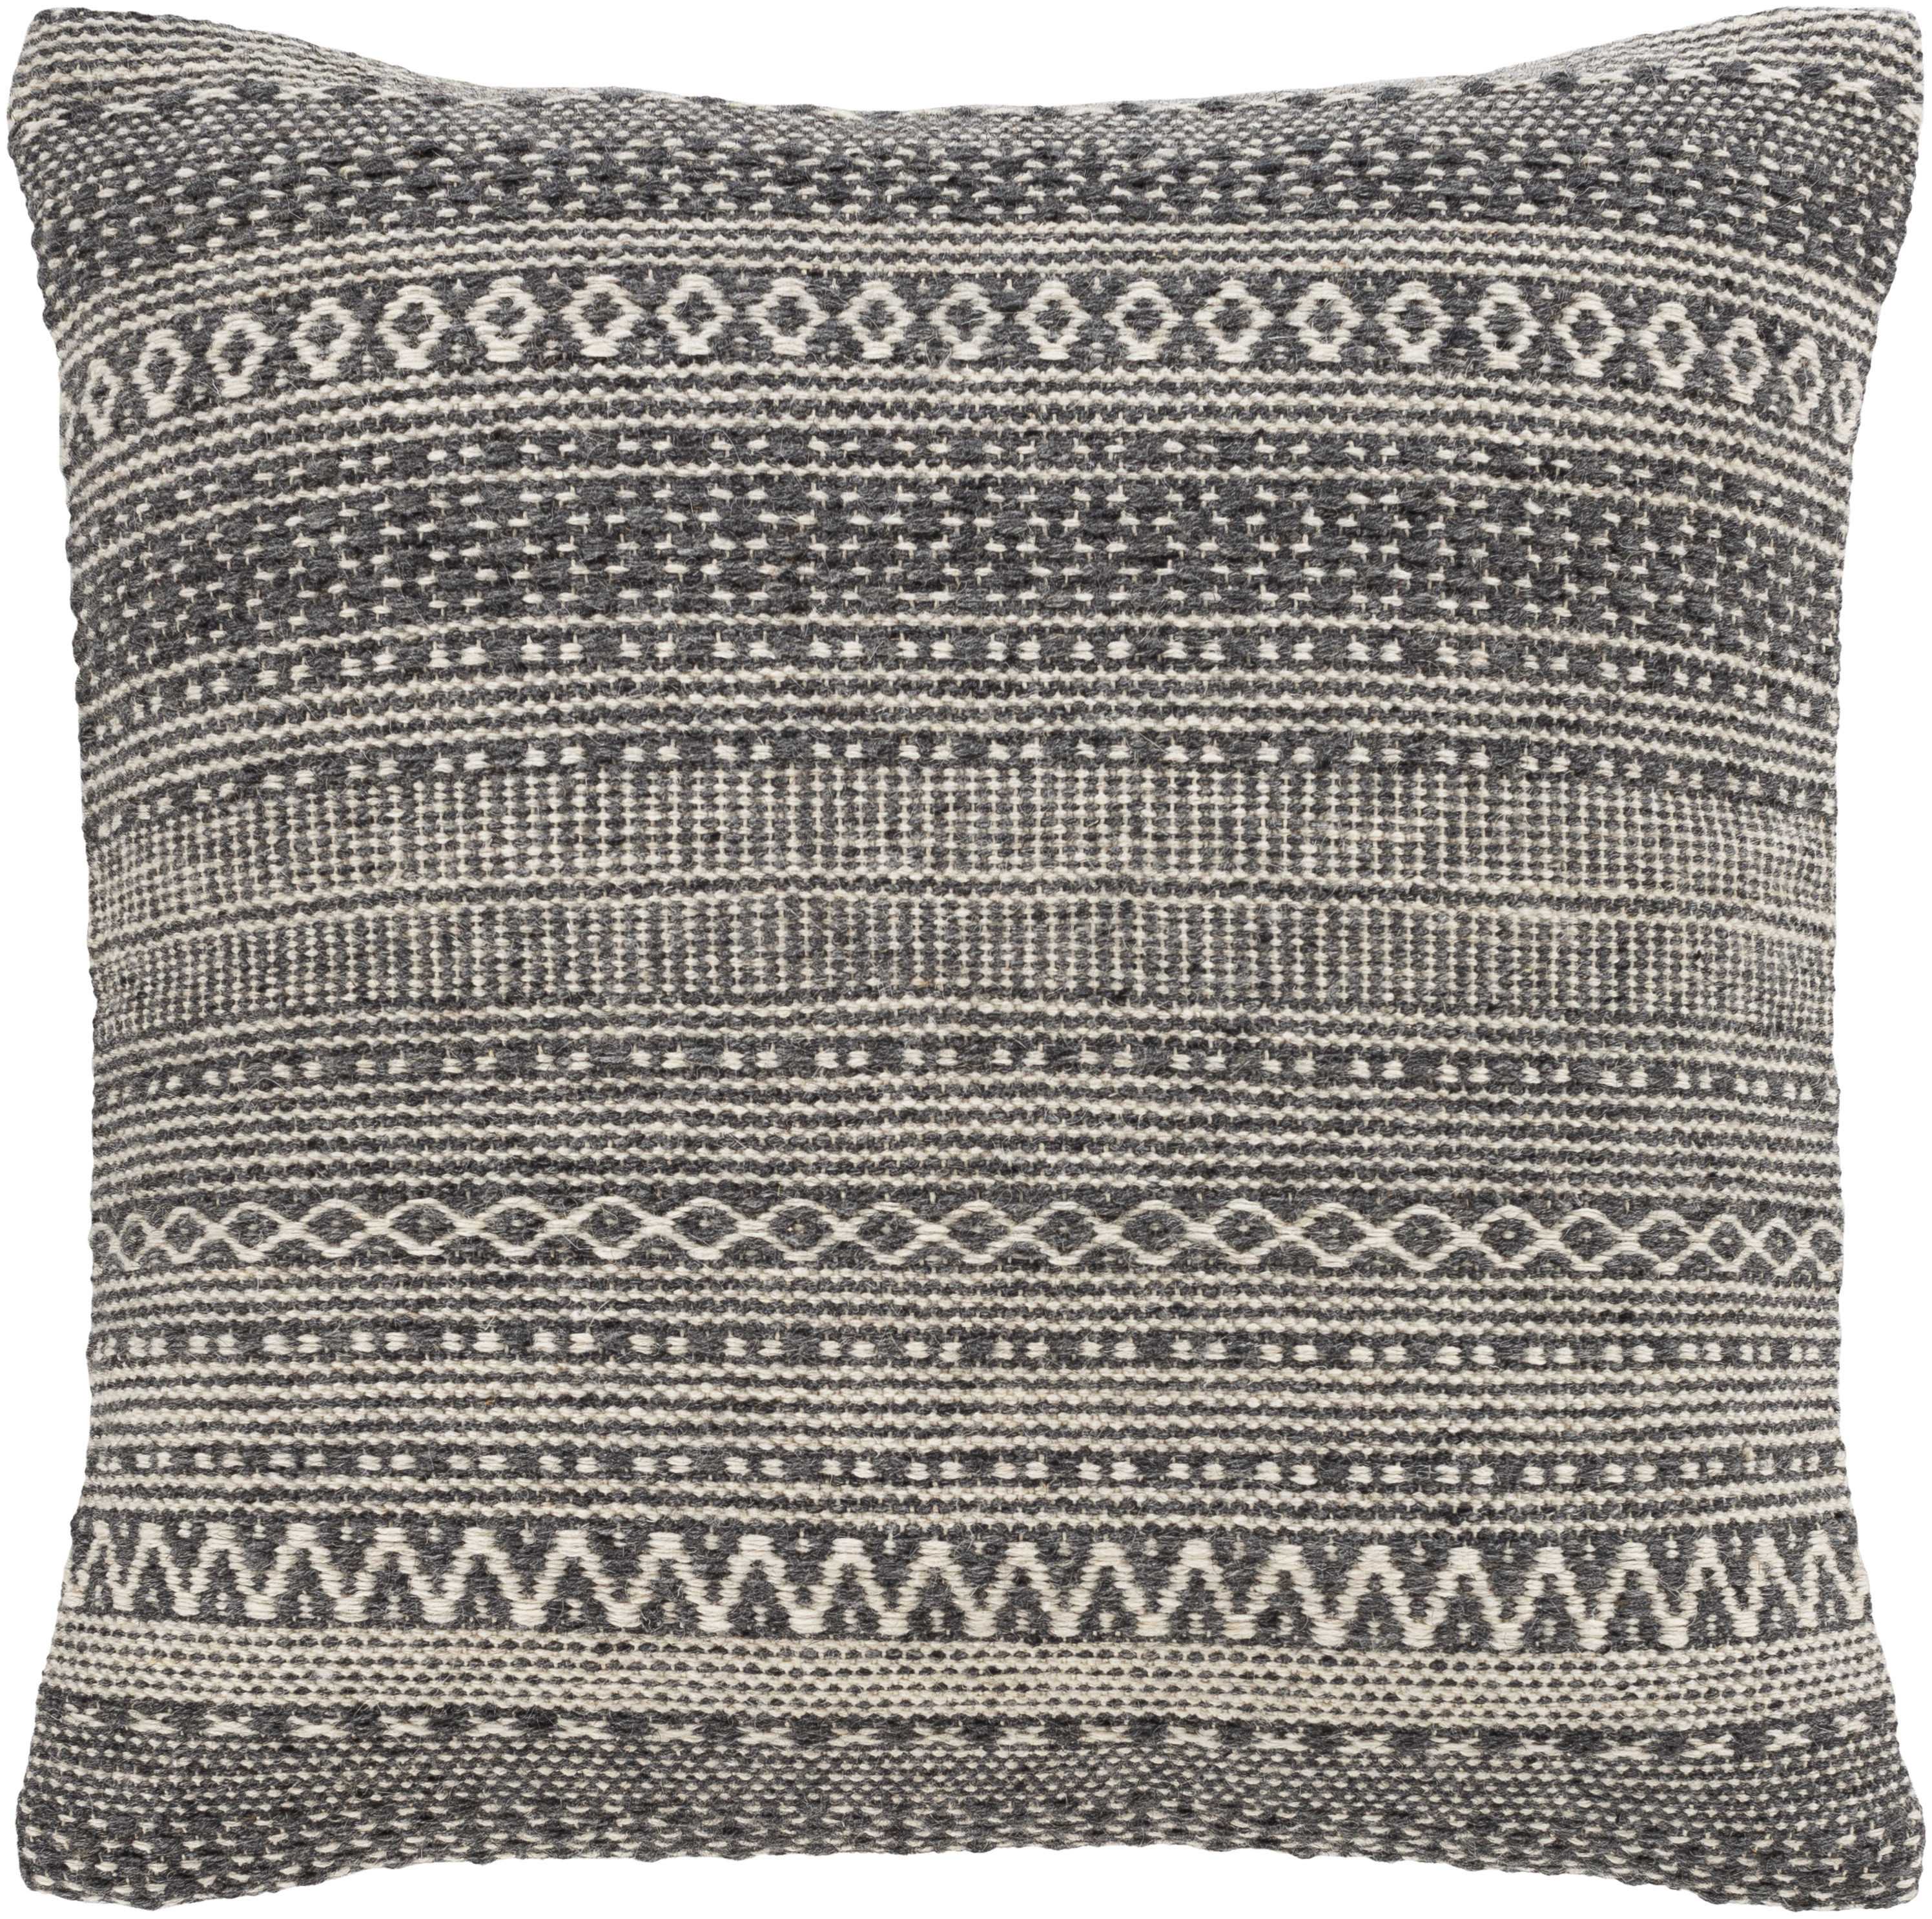 Surya Leif 20-in x 20-in Charcoal 80% Wool, 20% Cotton Indoor ...